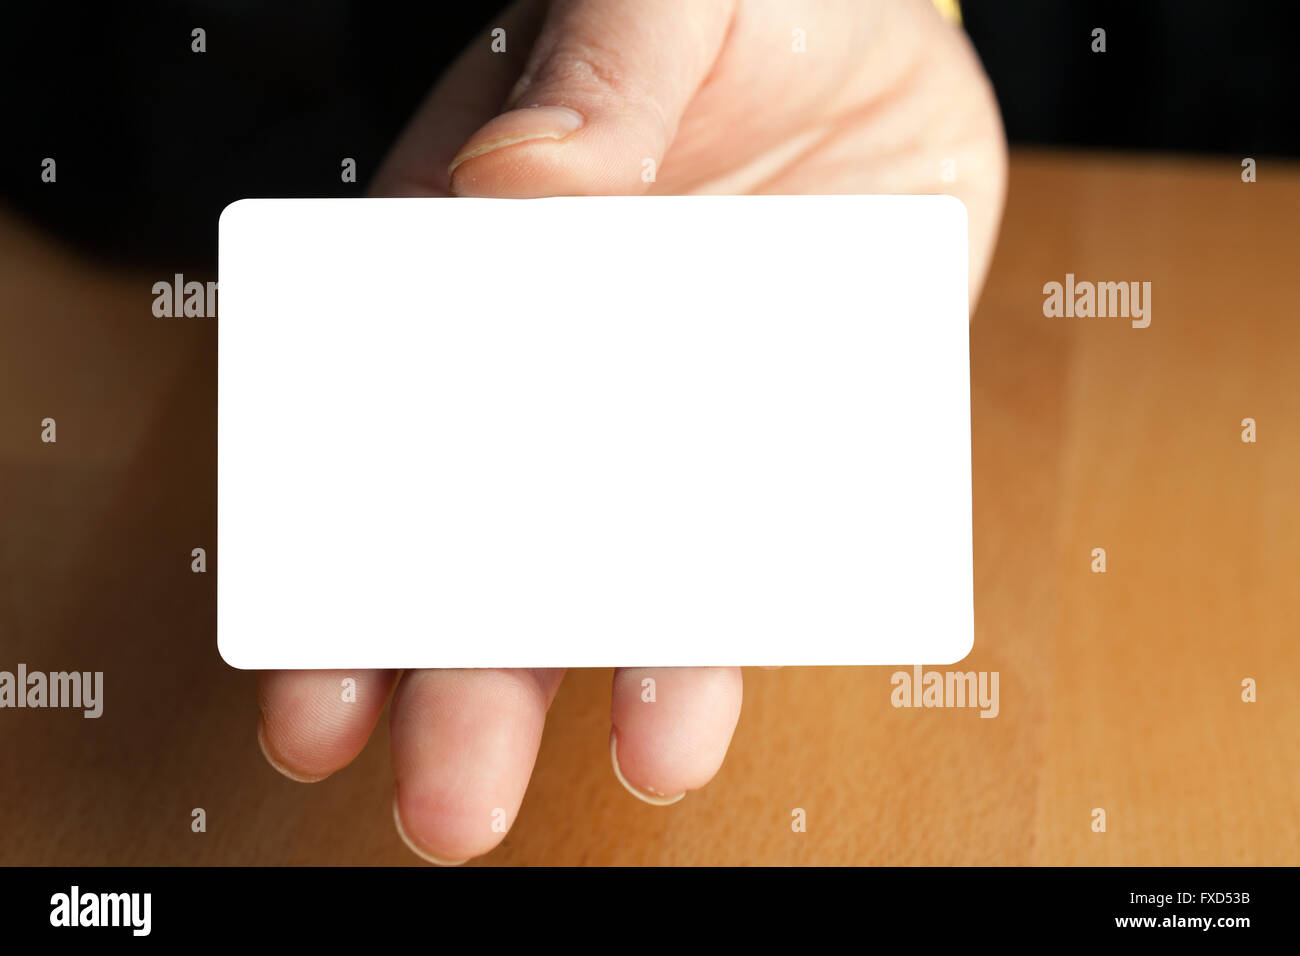 Hand Holding Blank Credit Card Stock Photo